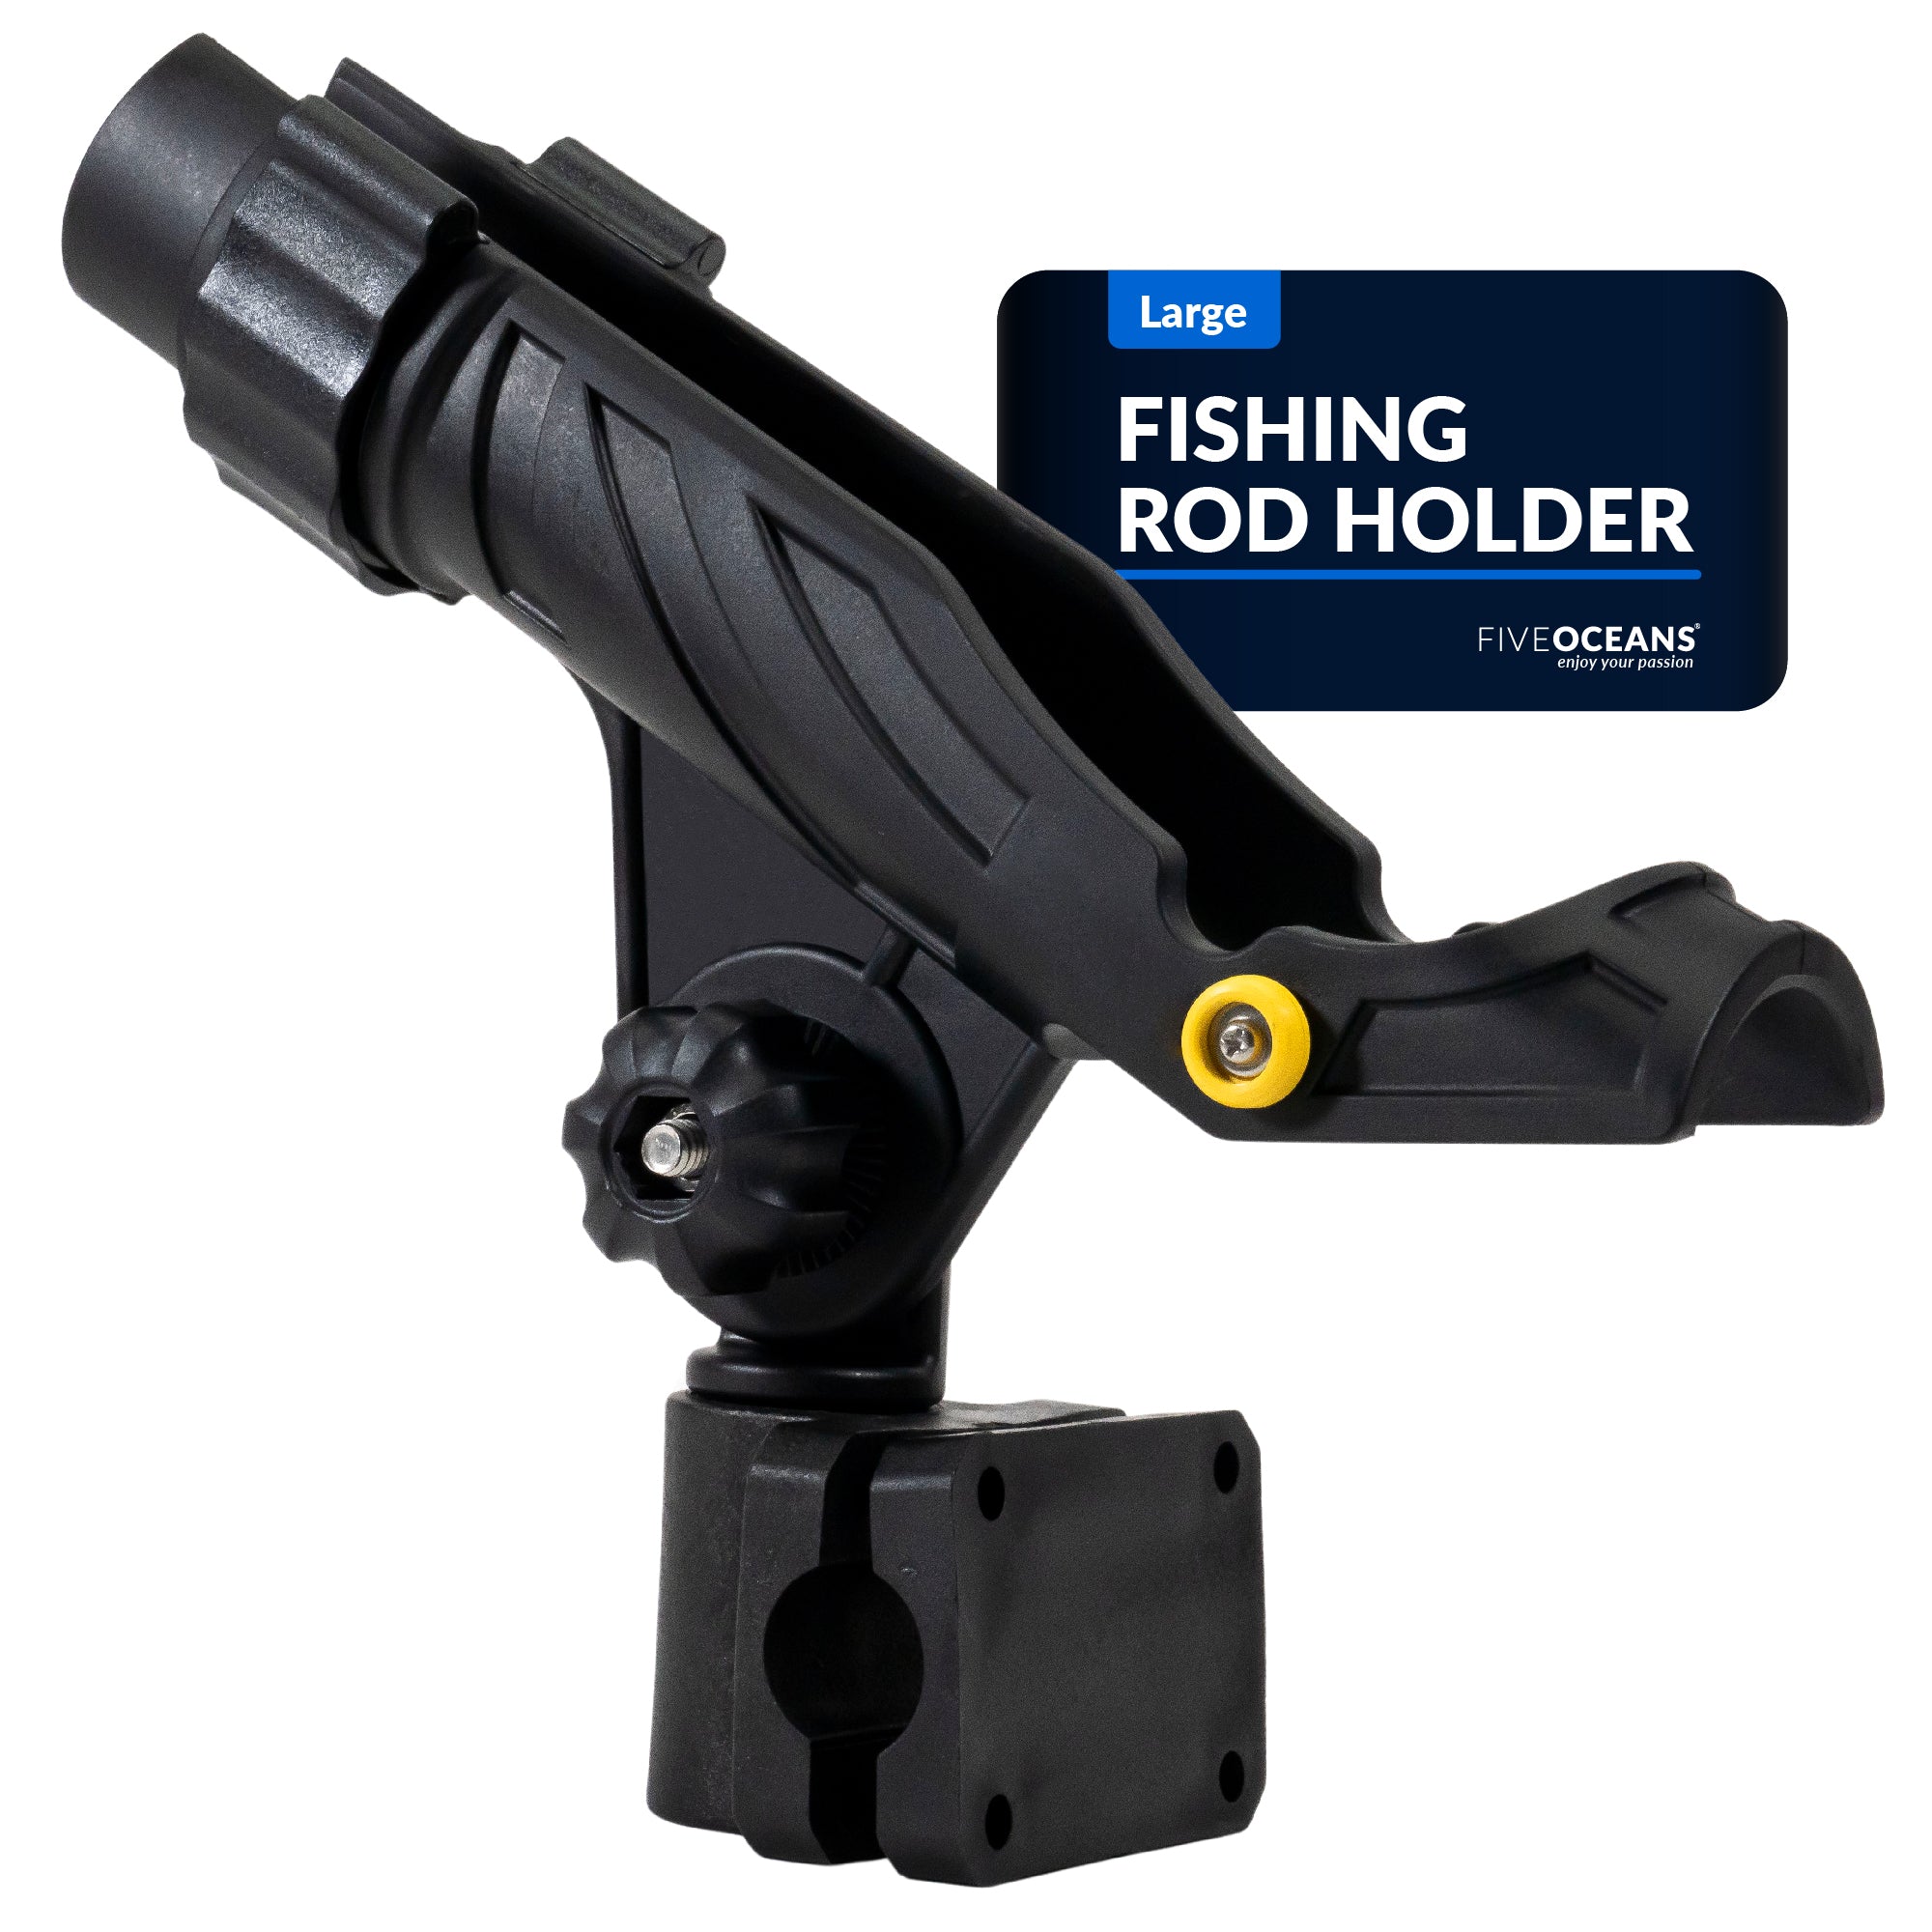 Rail Mount Fishing Rod Holder with Locking Mechanism and Hook Keeper - Size Small - FO4734